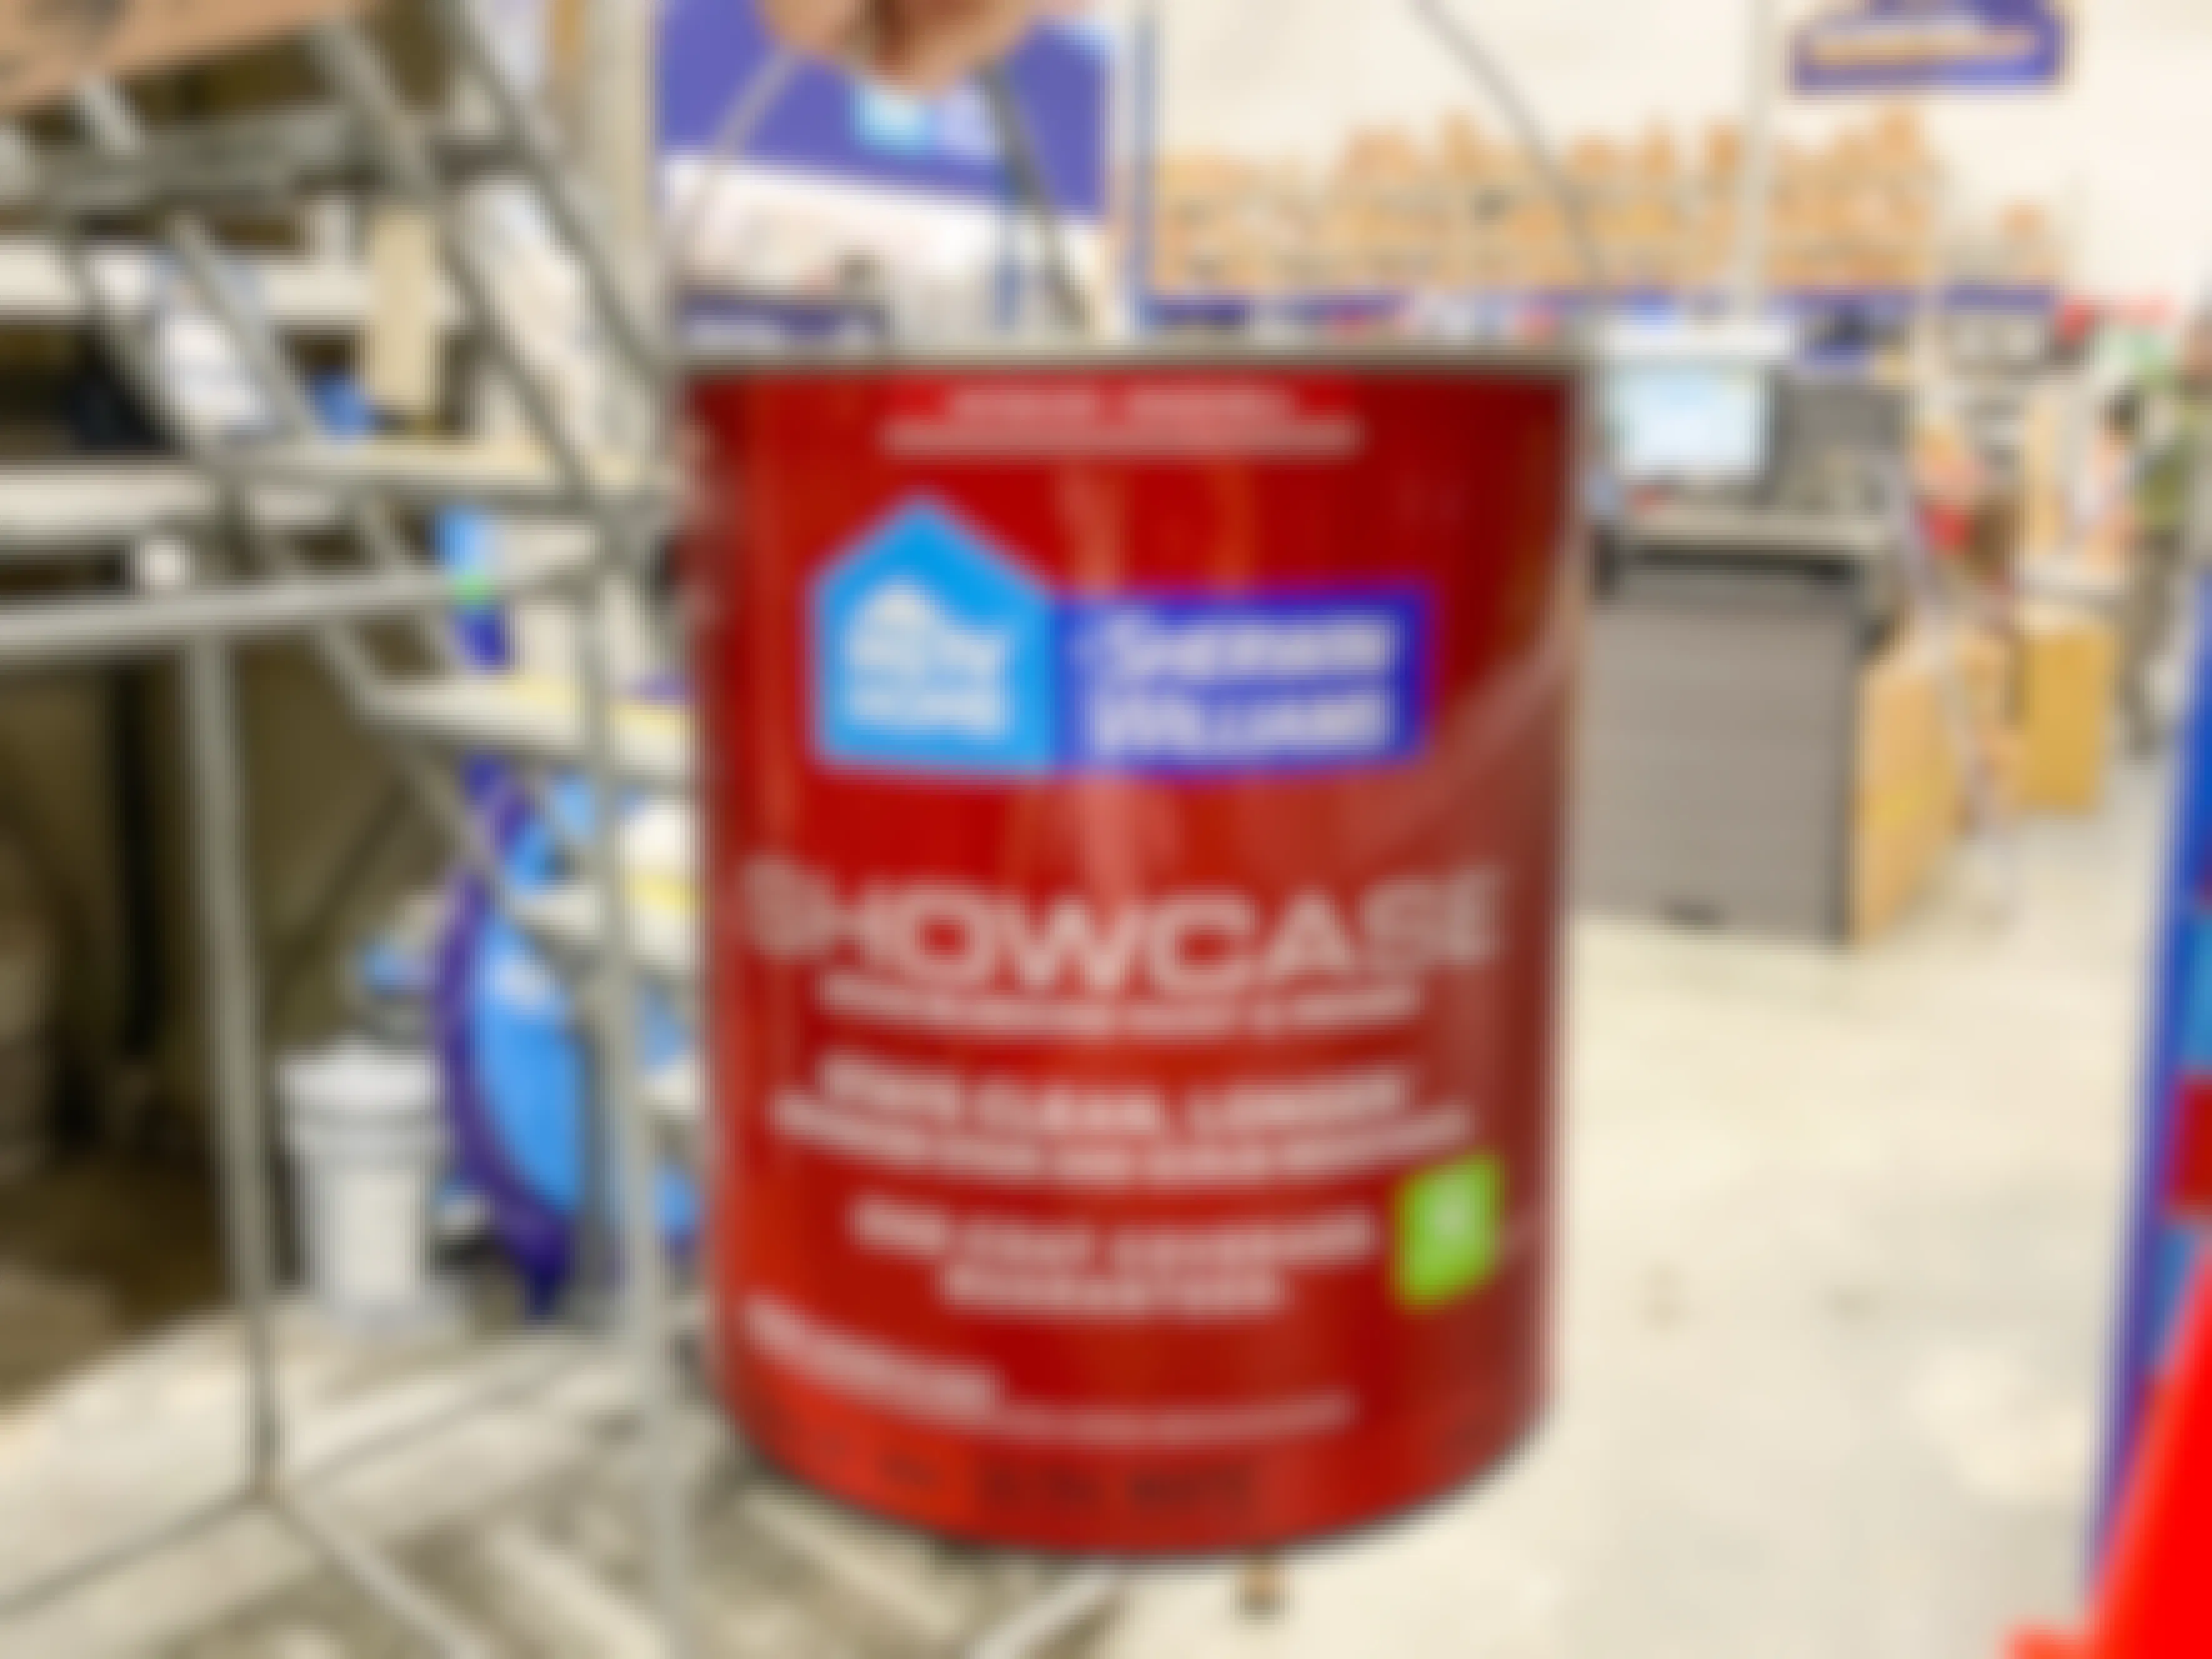 hand holding gallon of hgtv sherwin-williams paint in lowes store